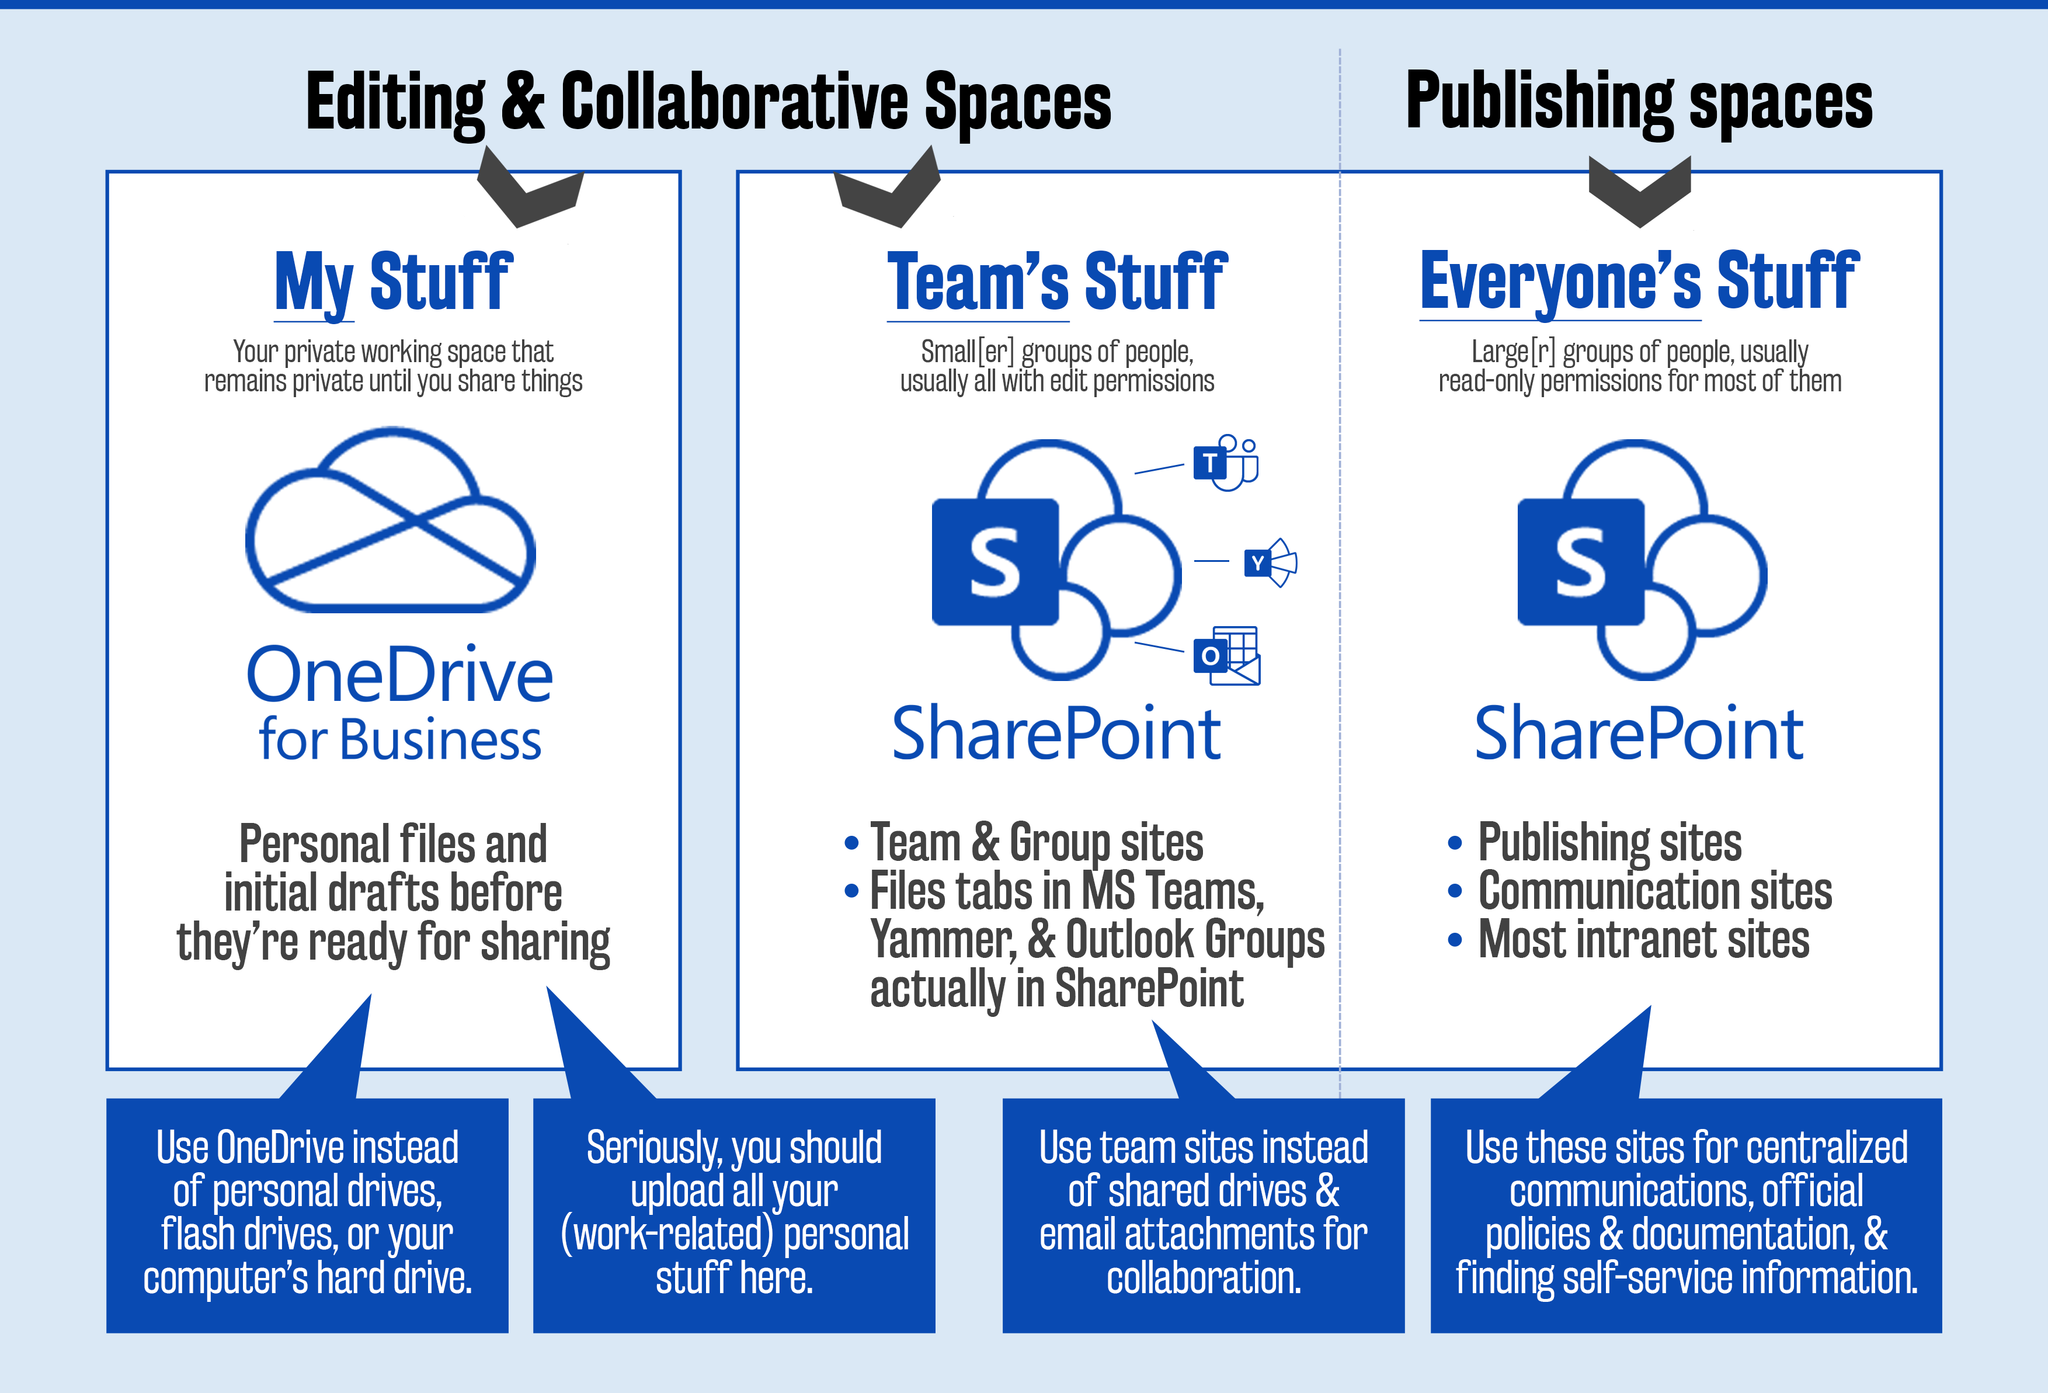 Why Use Sharepoint Instead Of Onedrive?